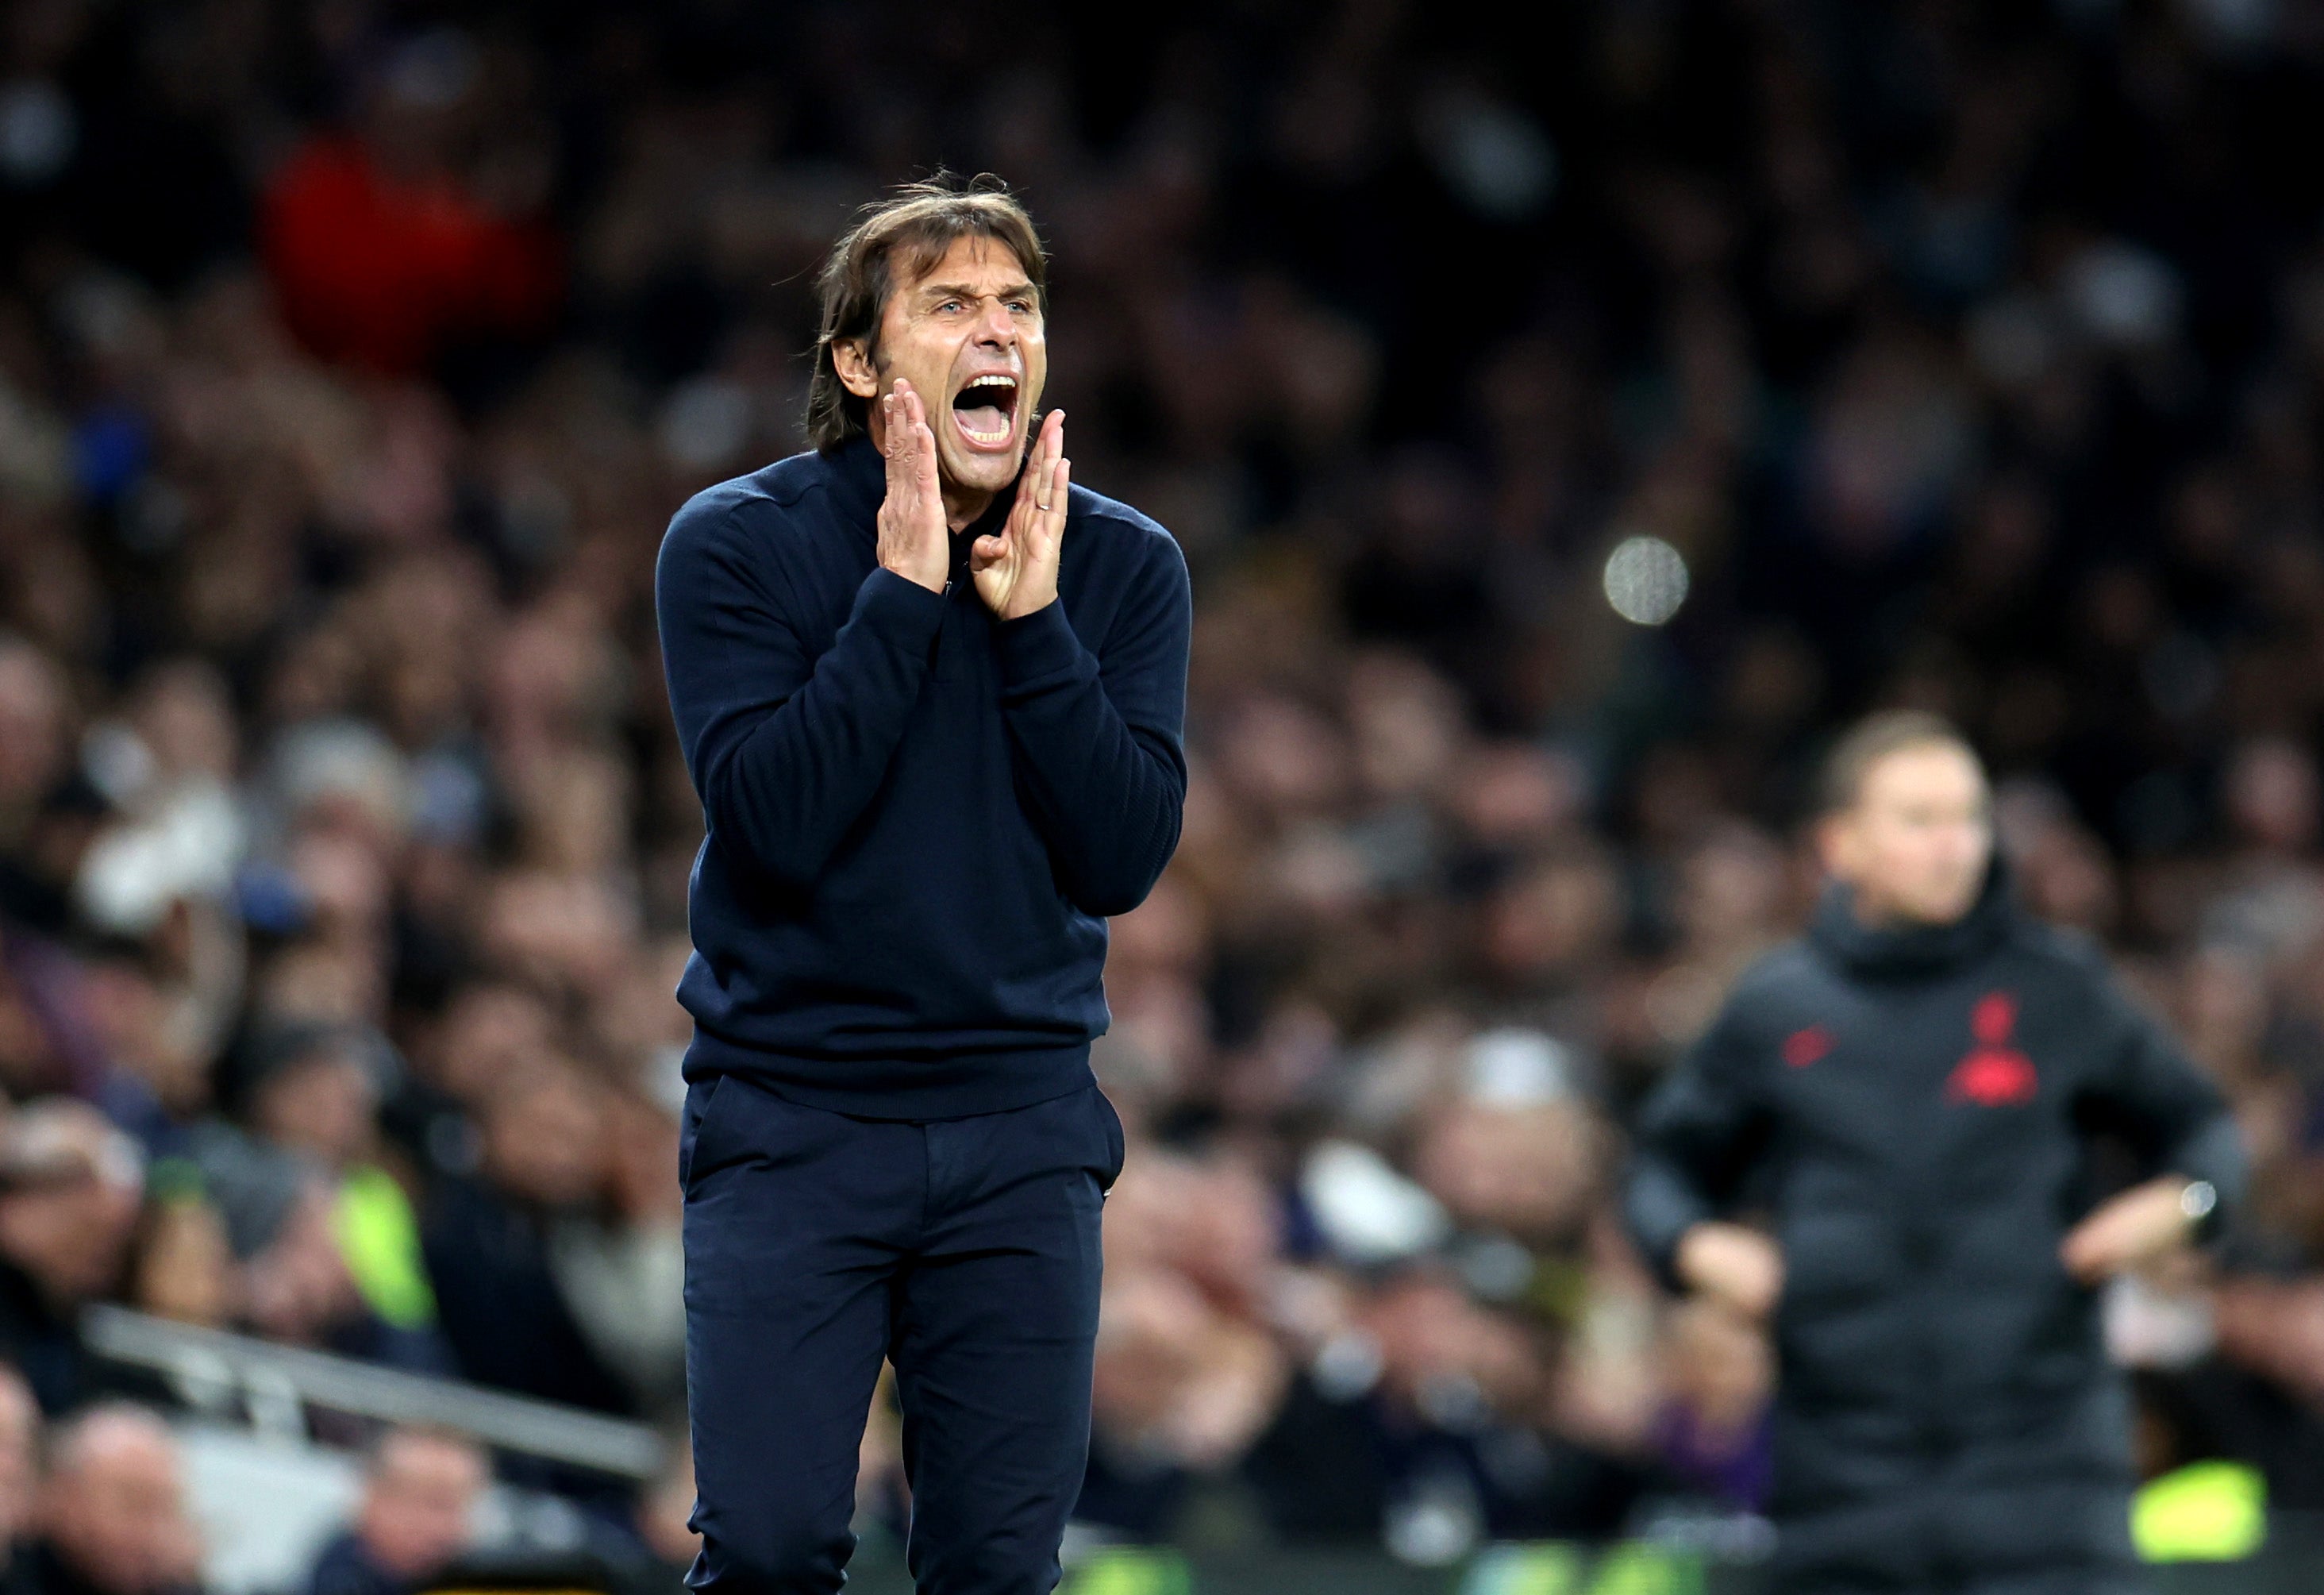 Antonio Conte instructs his players from the touchline